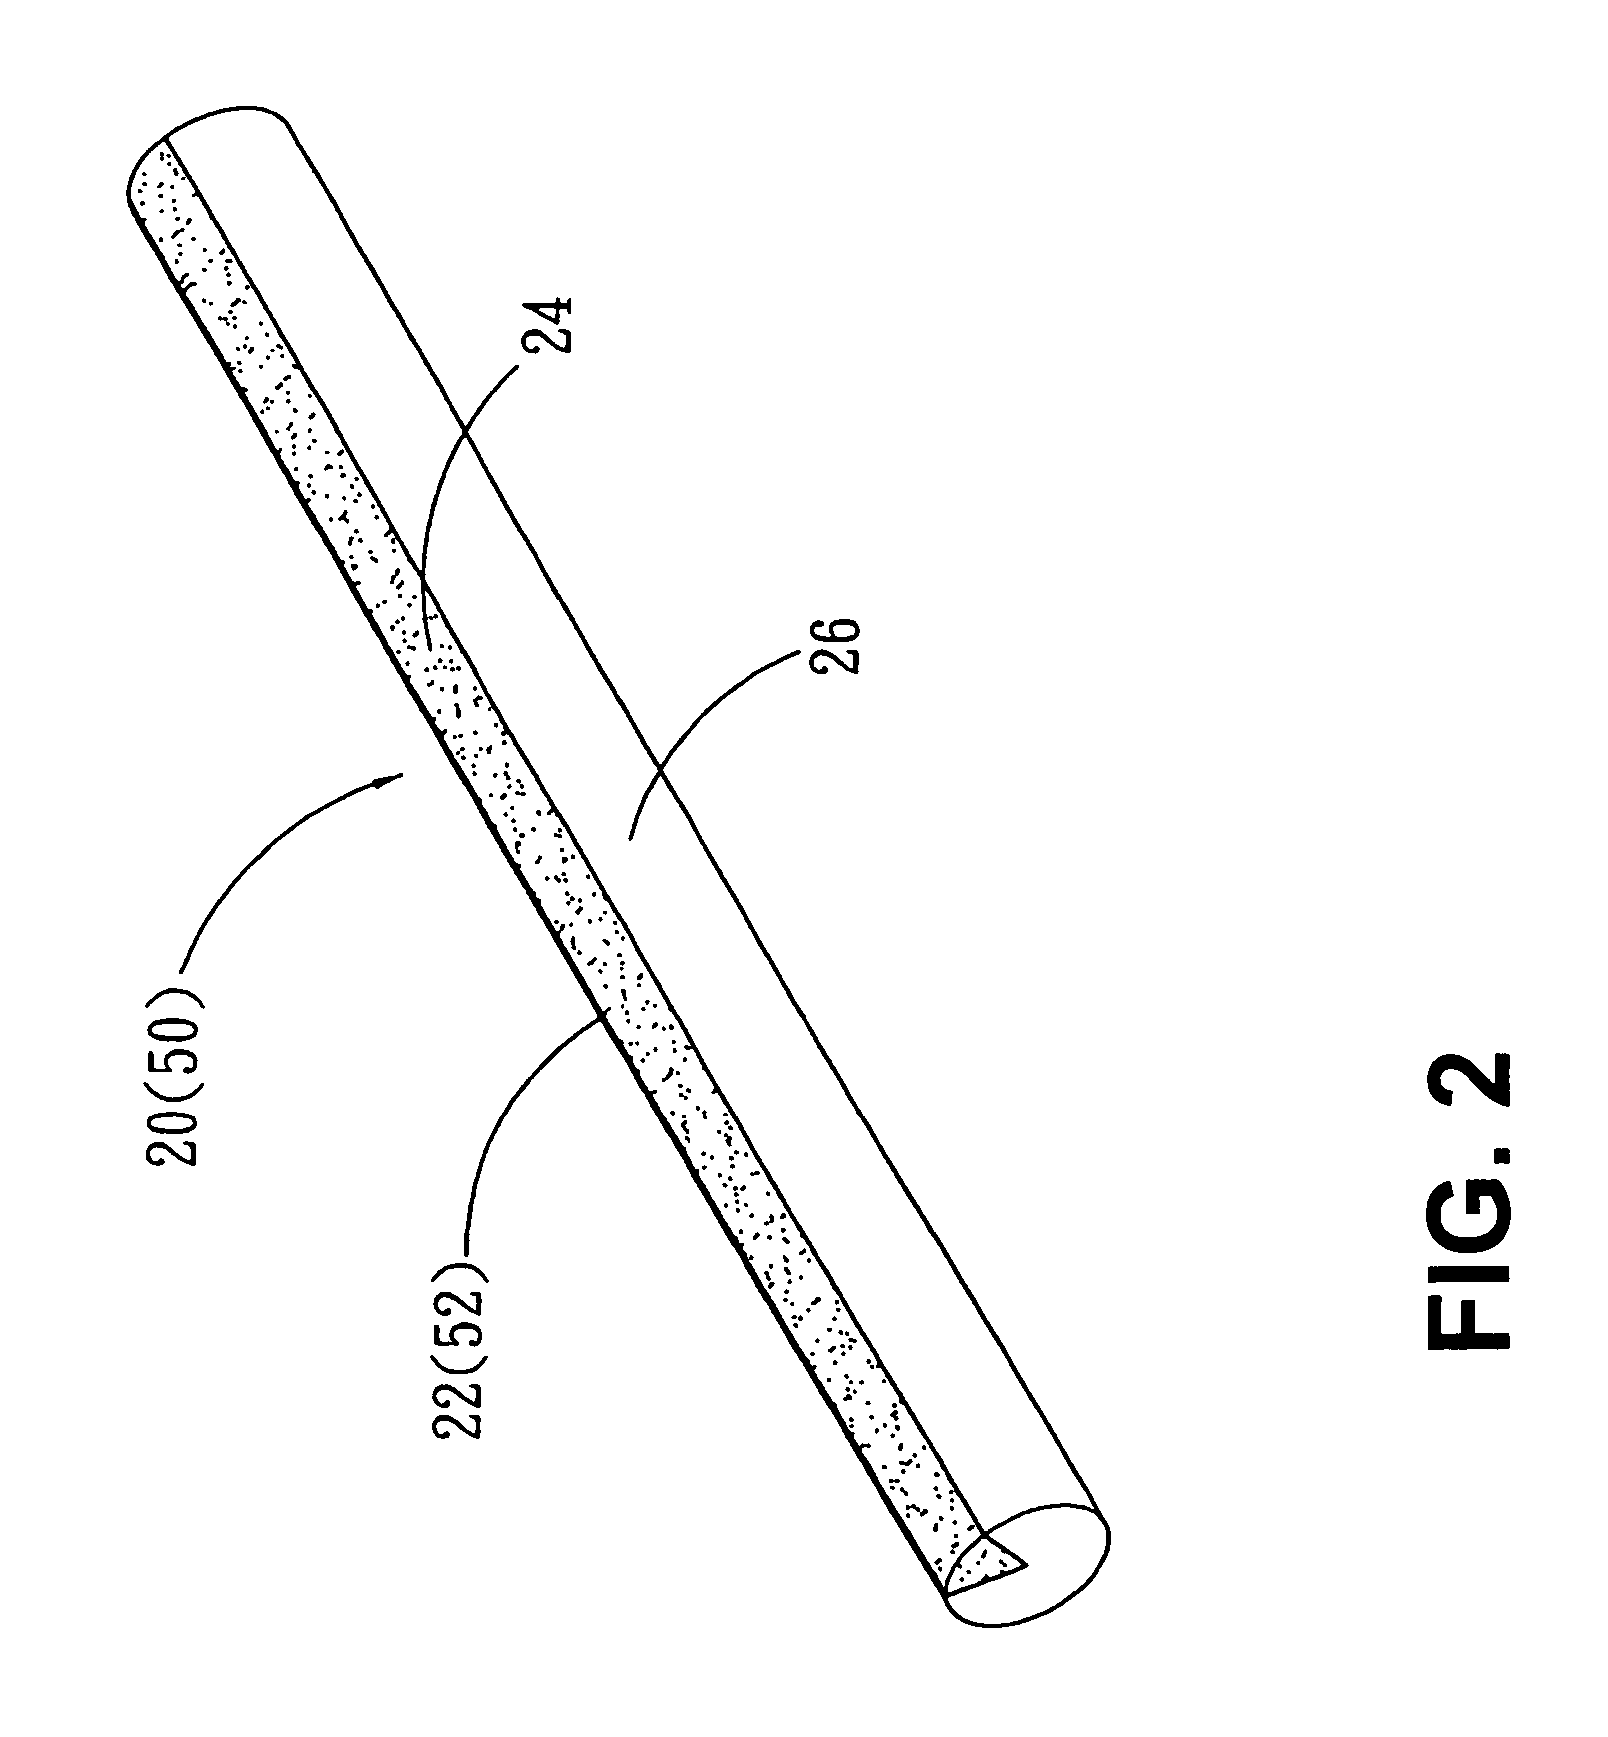 Multiple-background device for a scanner and calibration device utilizing the same principle